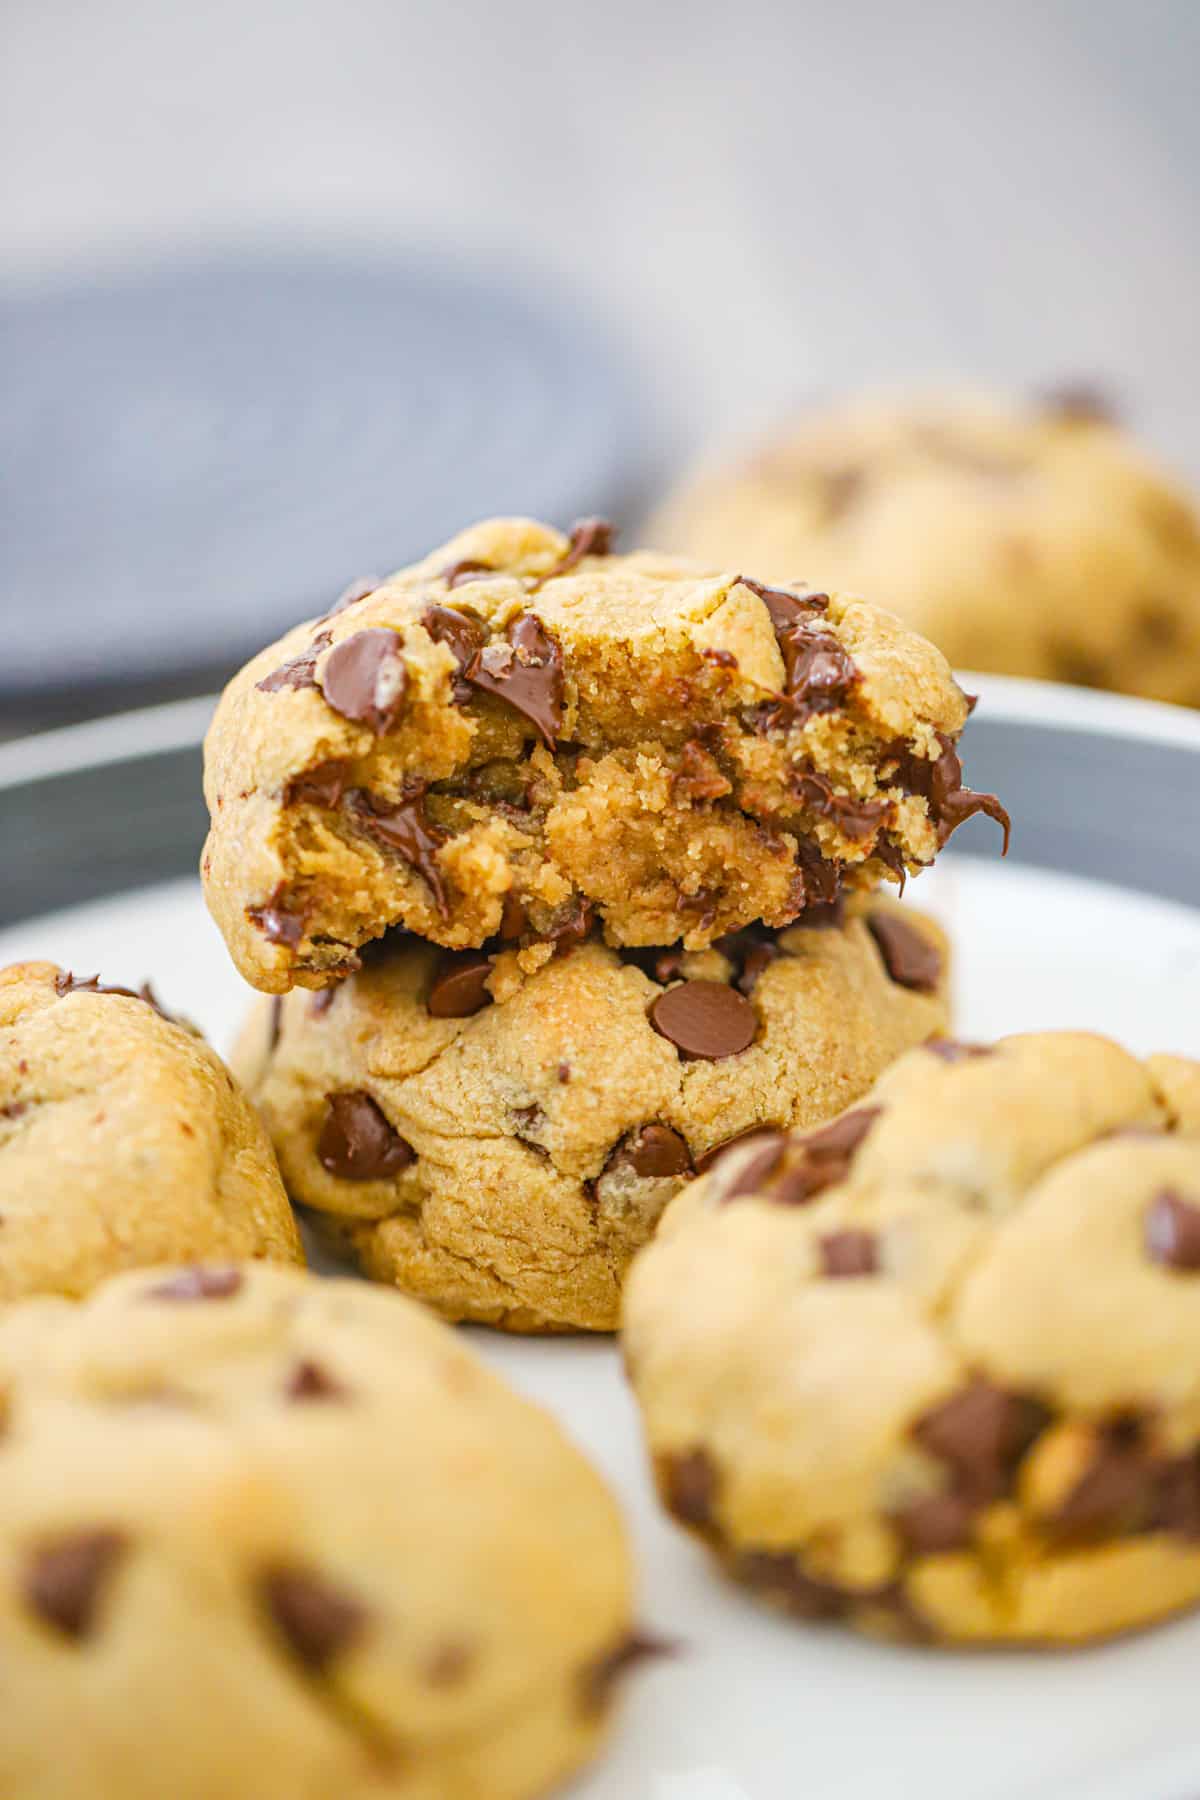 Thick Old-Fashioned Chocolate Chip Cookies recipe